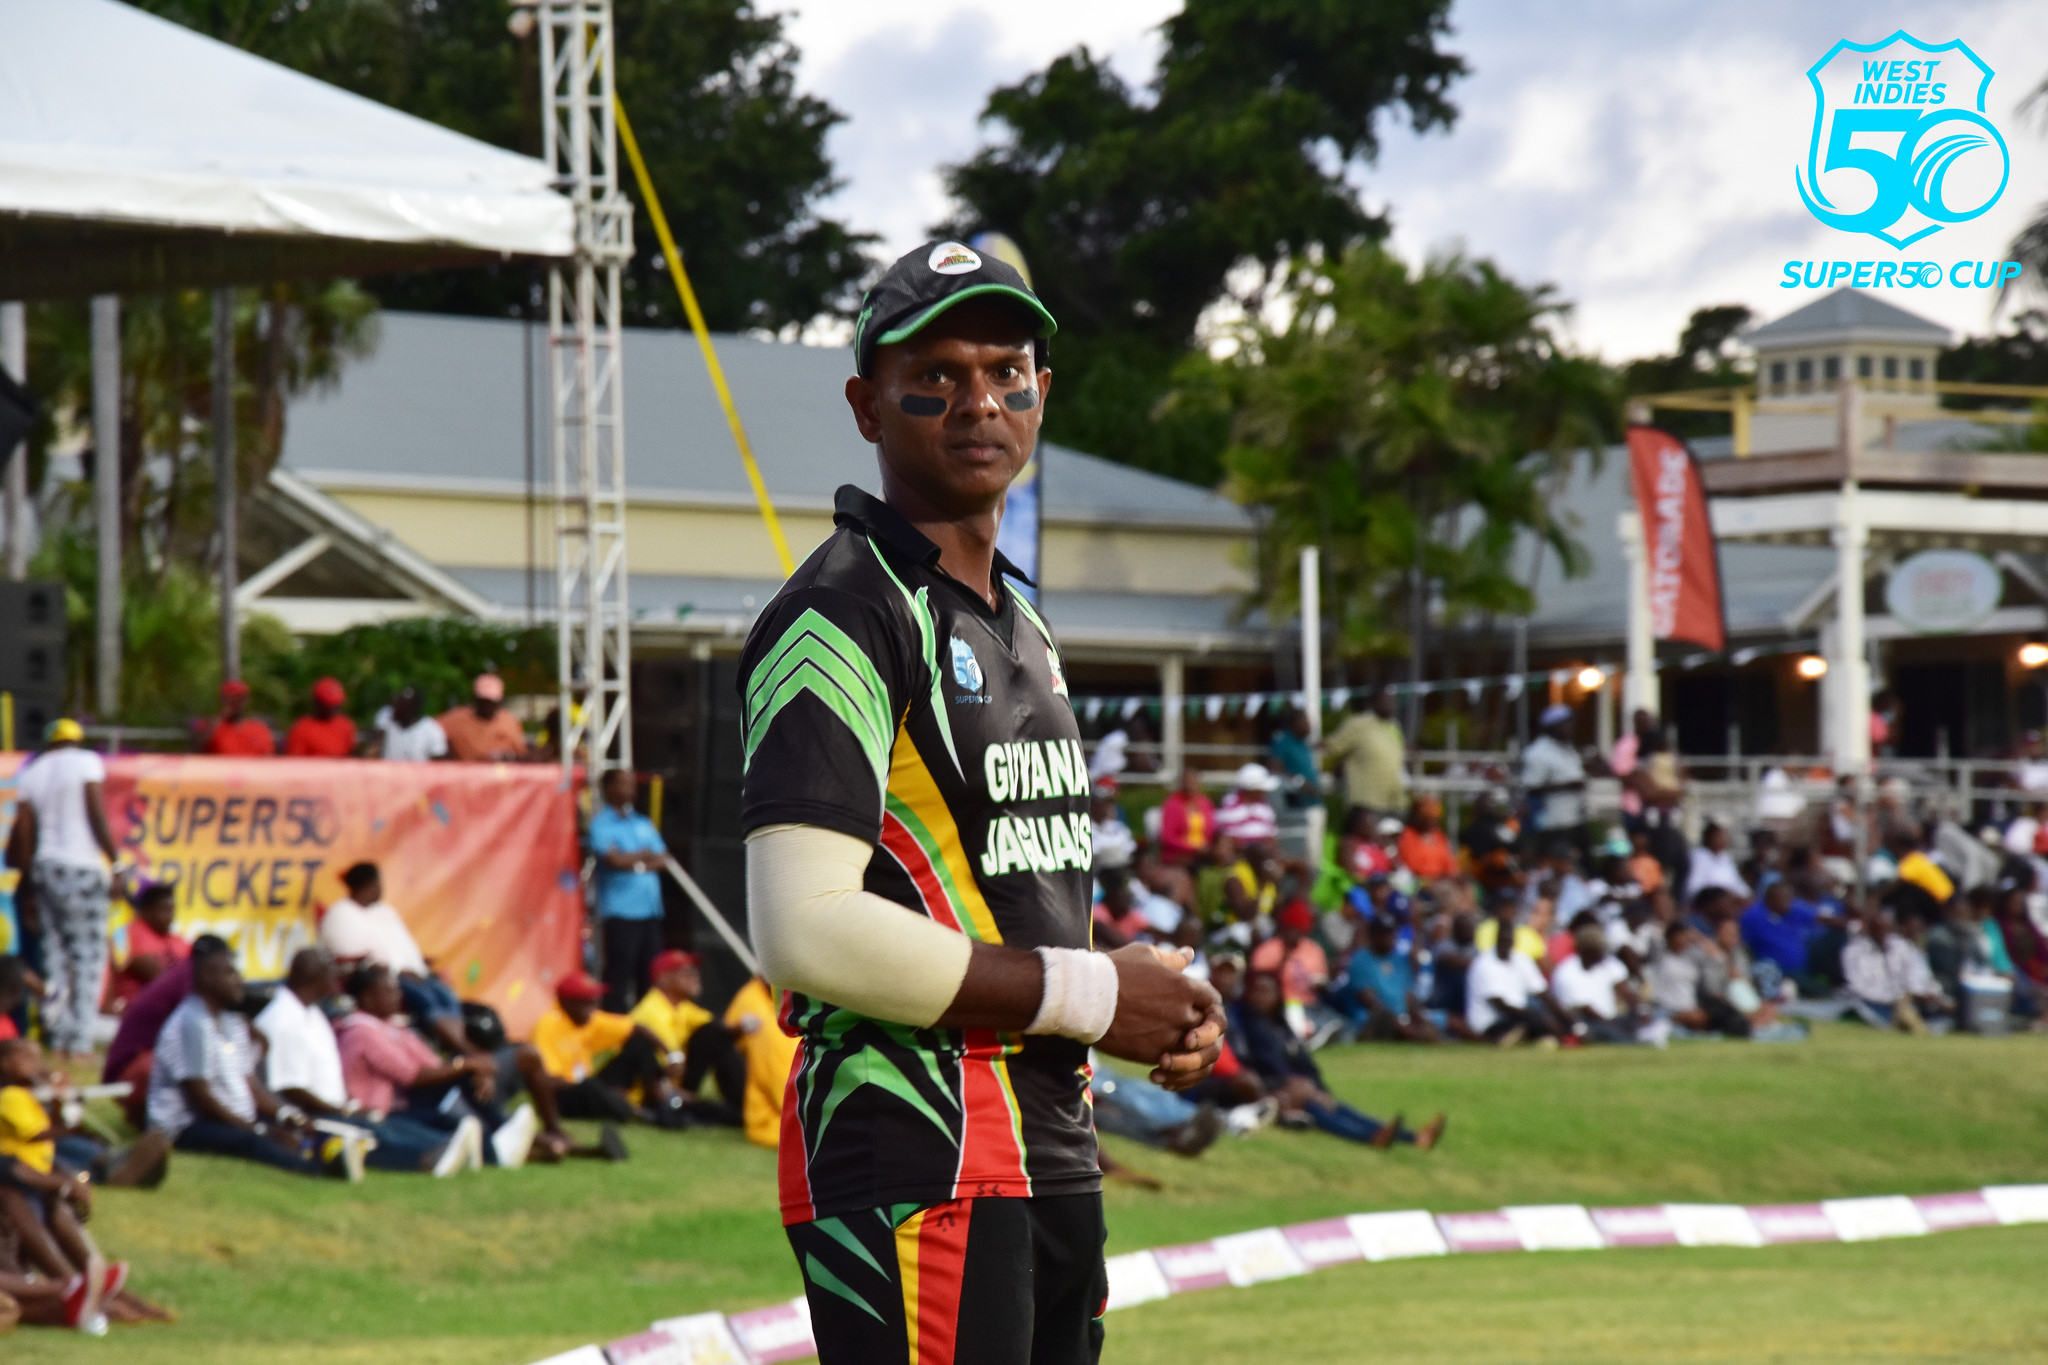 Chanderpauls prove too strong for USA as Guyana take 7 wicket win